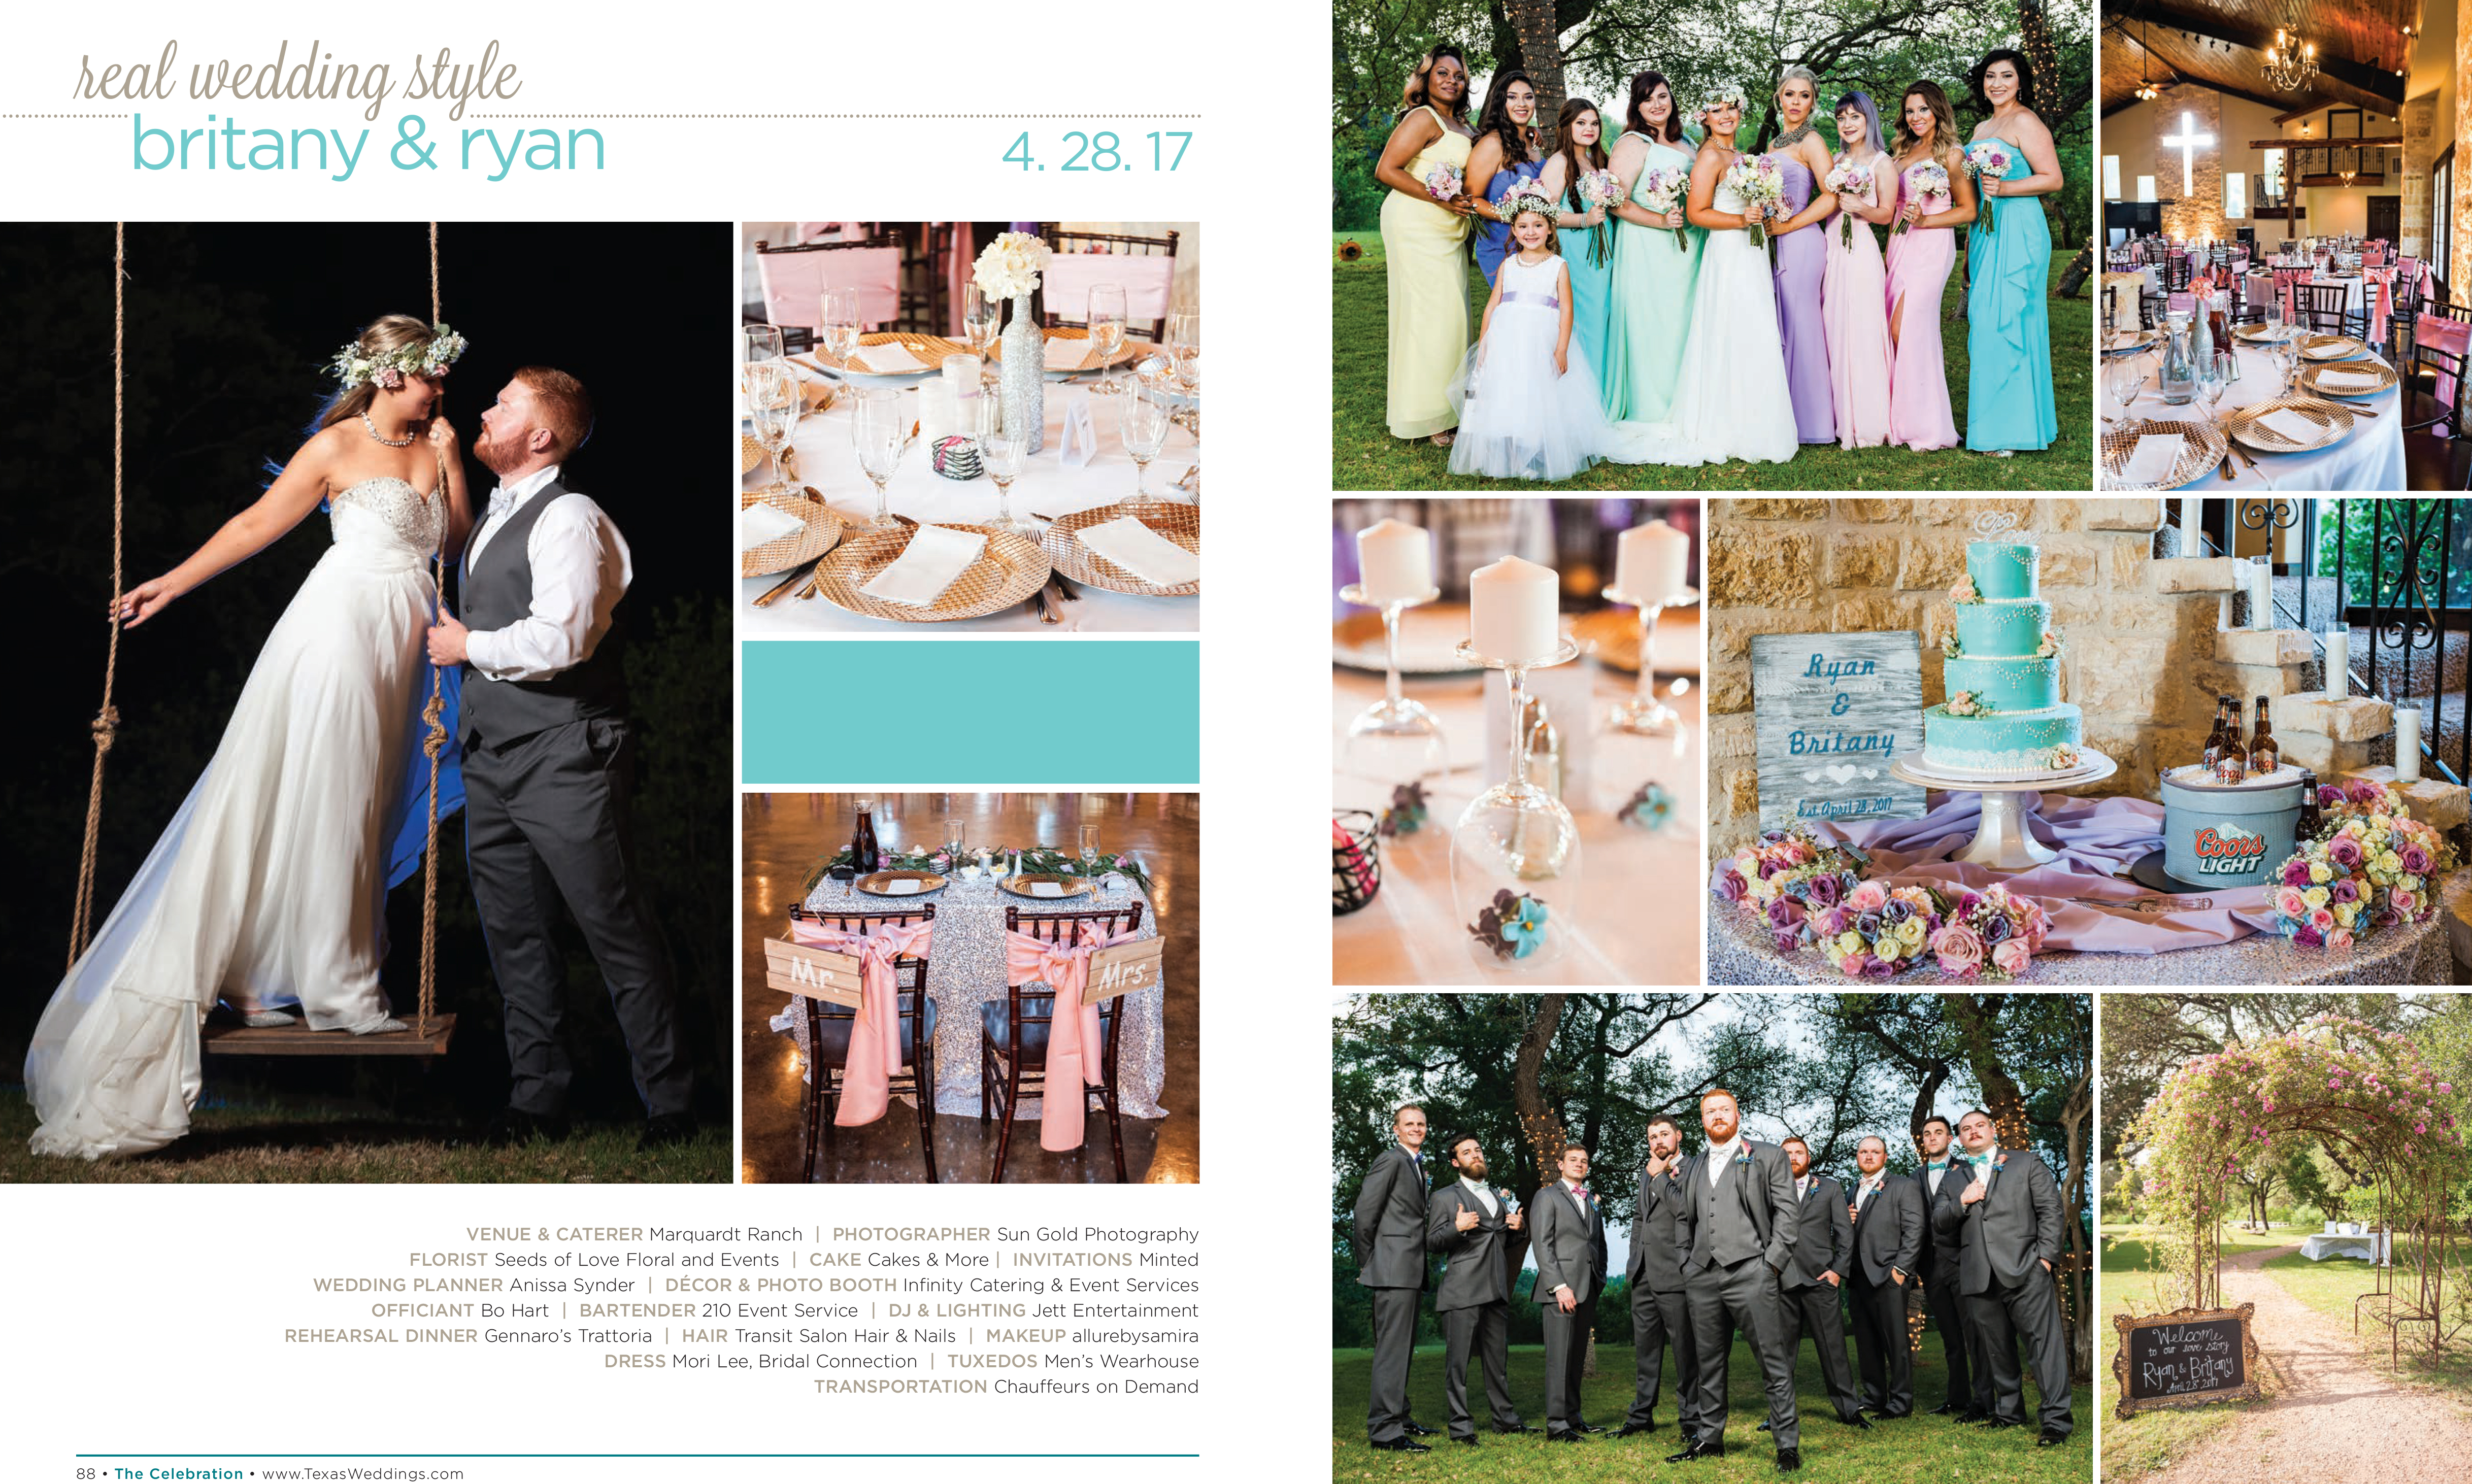 Britany & Ryan in their Real Wedding Page in the Fall/Winter 2017 Texas Wedding Guide